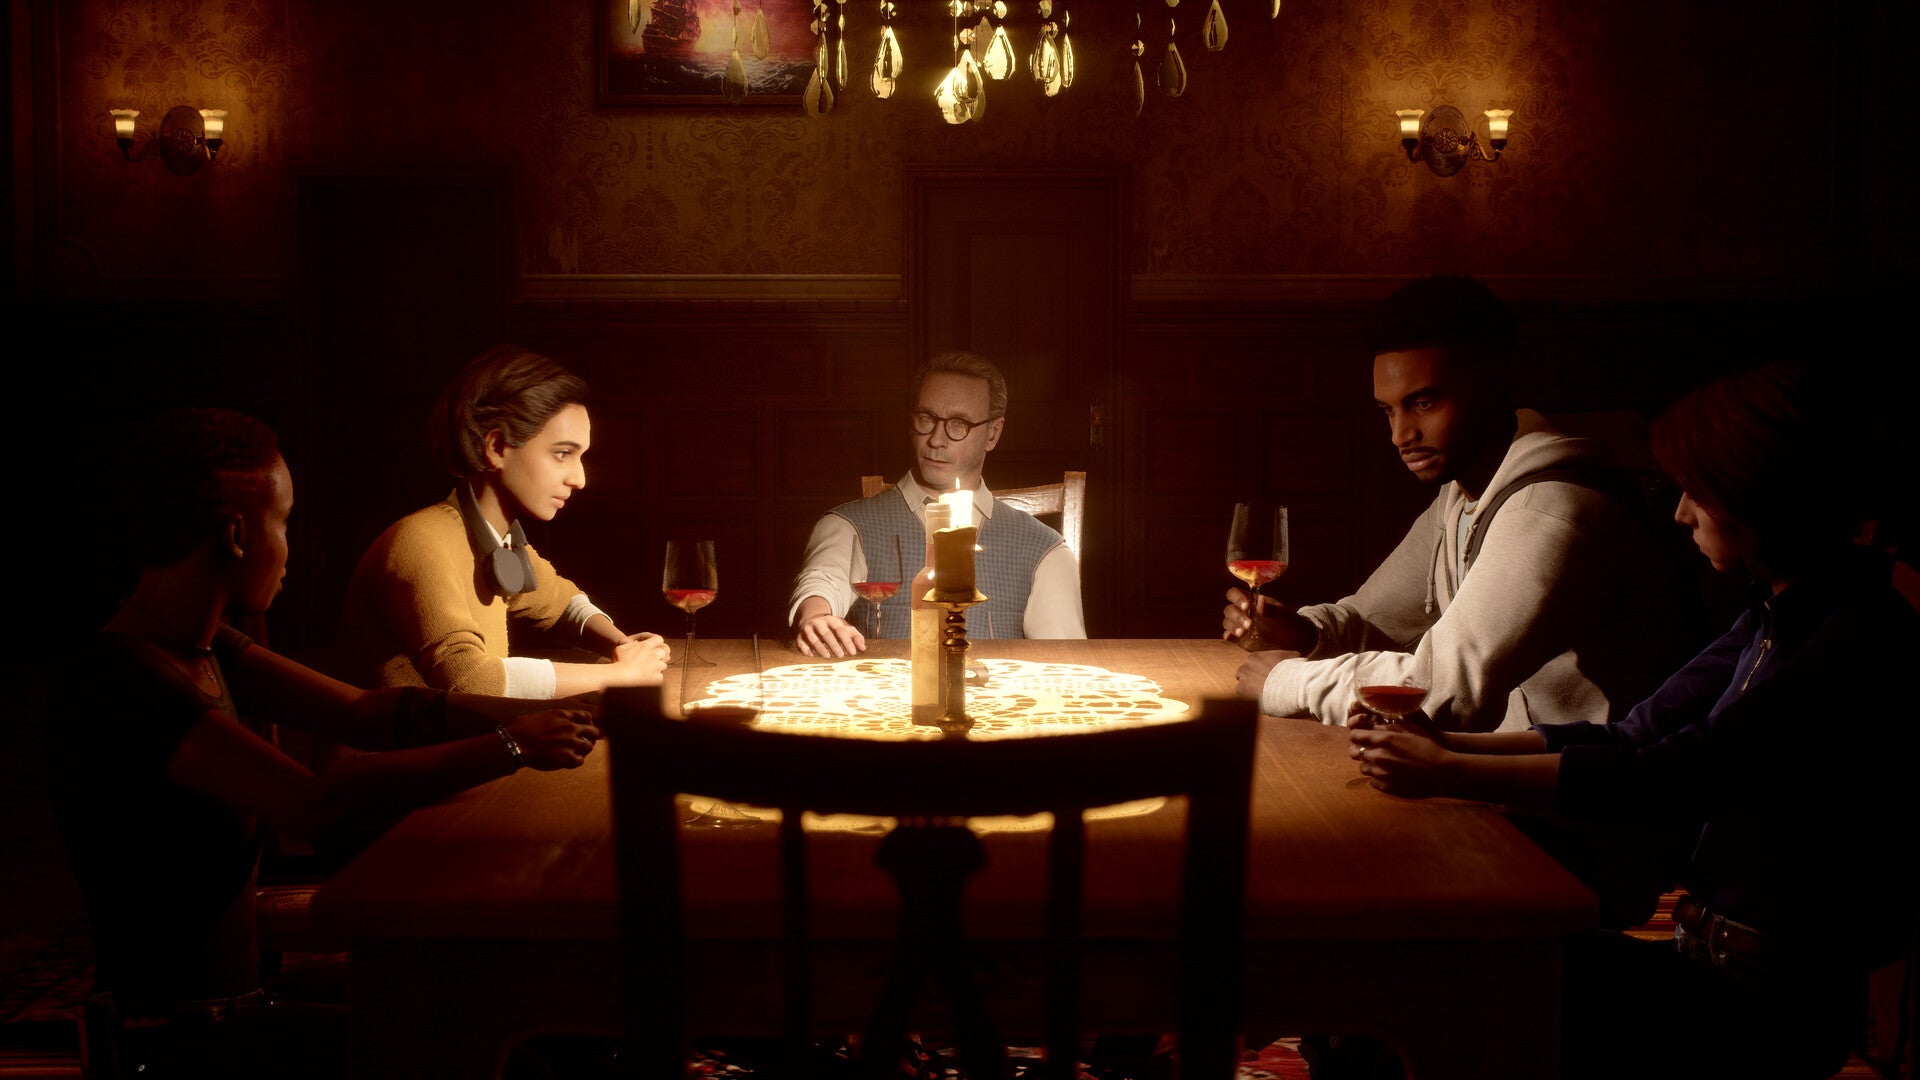 The five player characters from The Devil In Me sit tensely around a dimly-lit dinner table drinking red wine (left to right: Jamie, Erin, Charlie, Mark, and Kate).